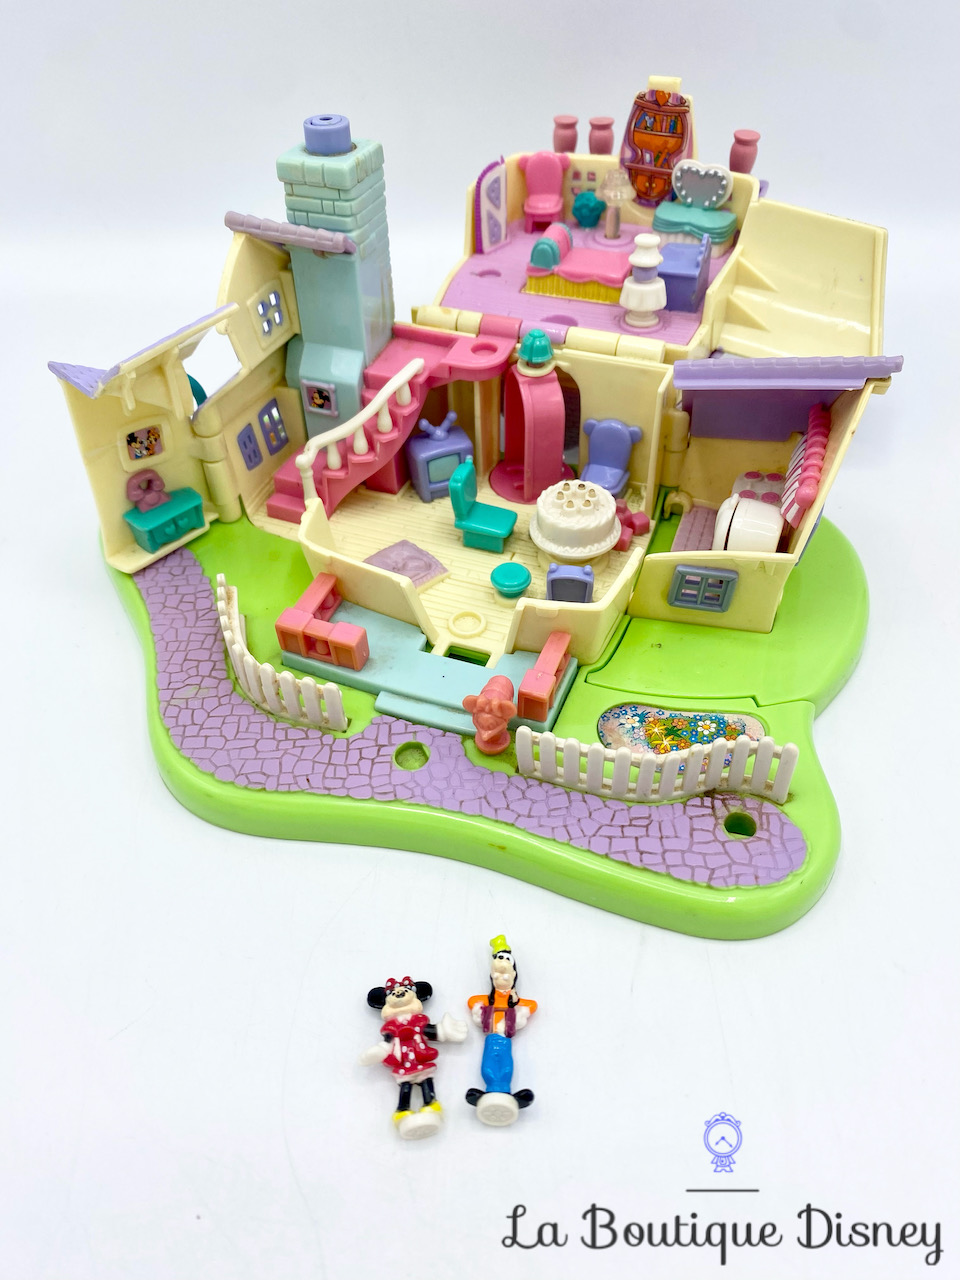 Polly Pocket Bluebird Maison Minnie Surprise Party Disney 1995 Tiny  Collection personnages